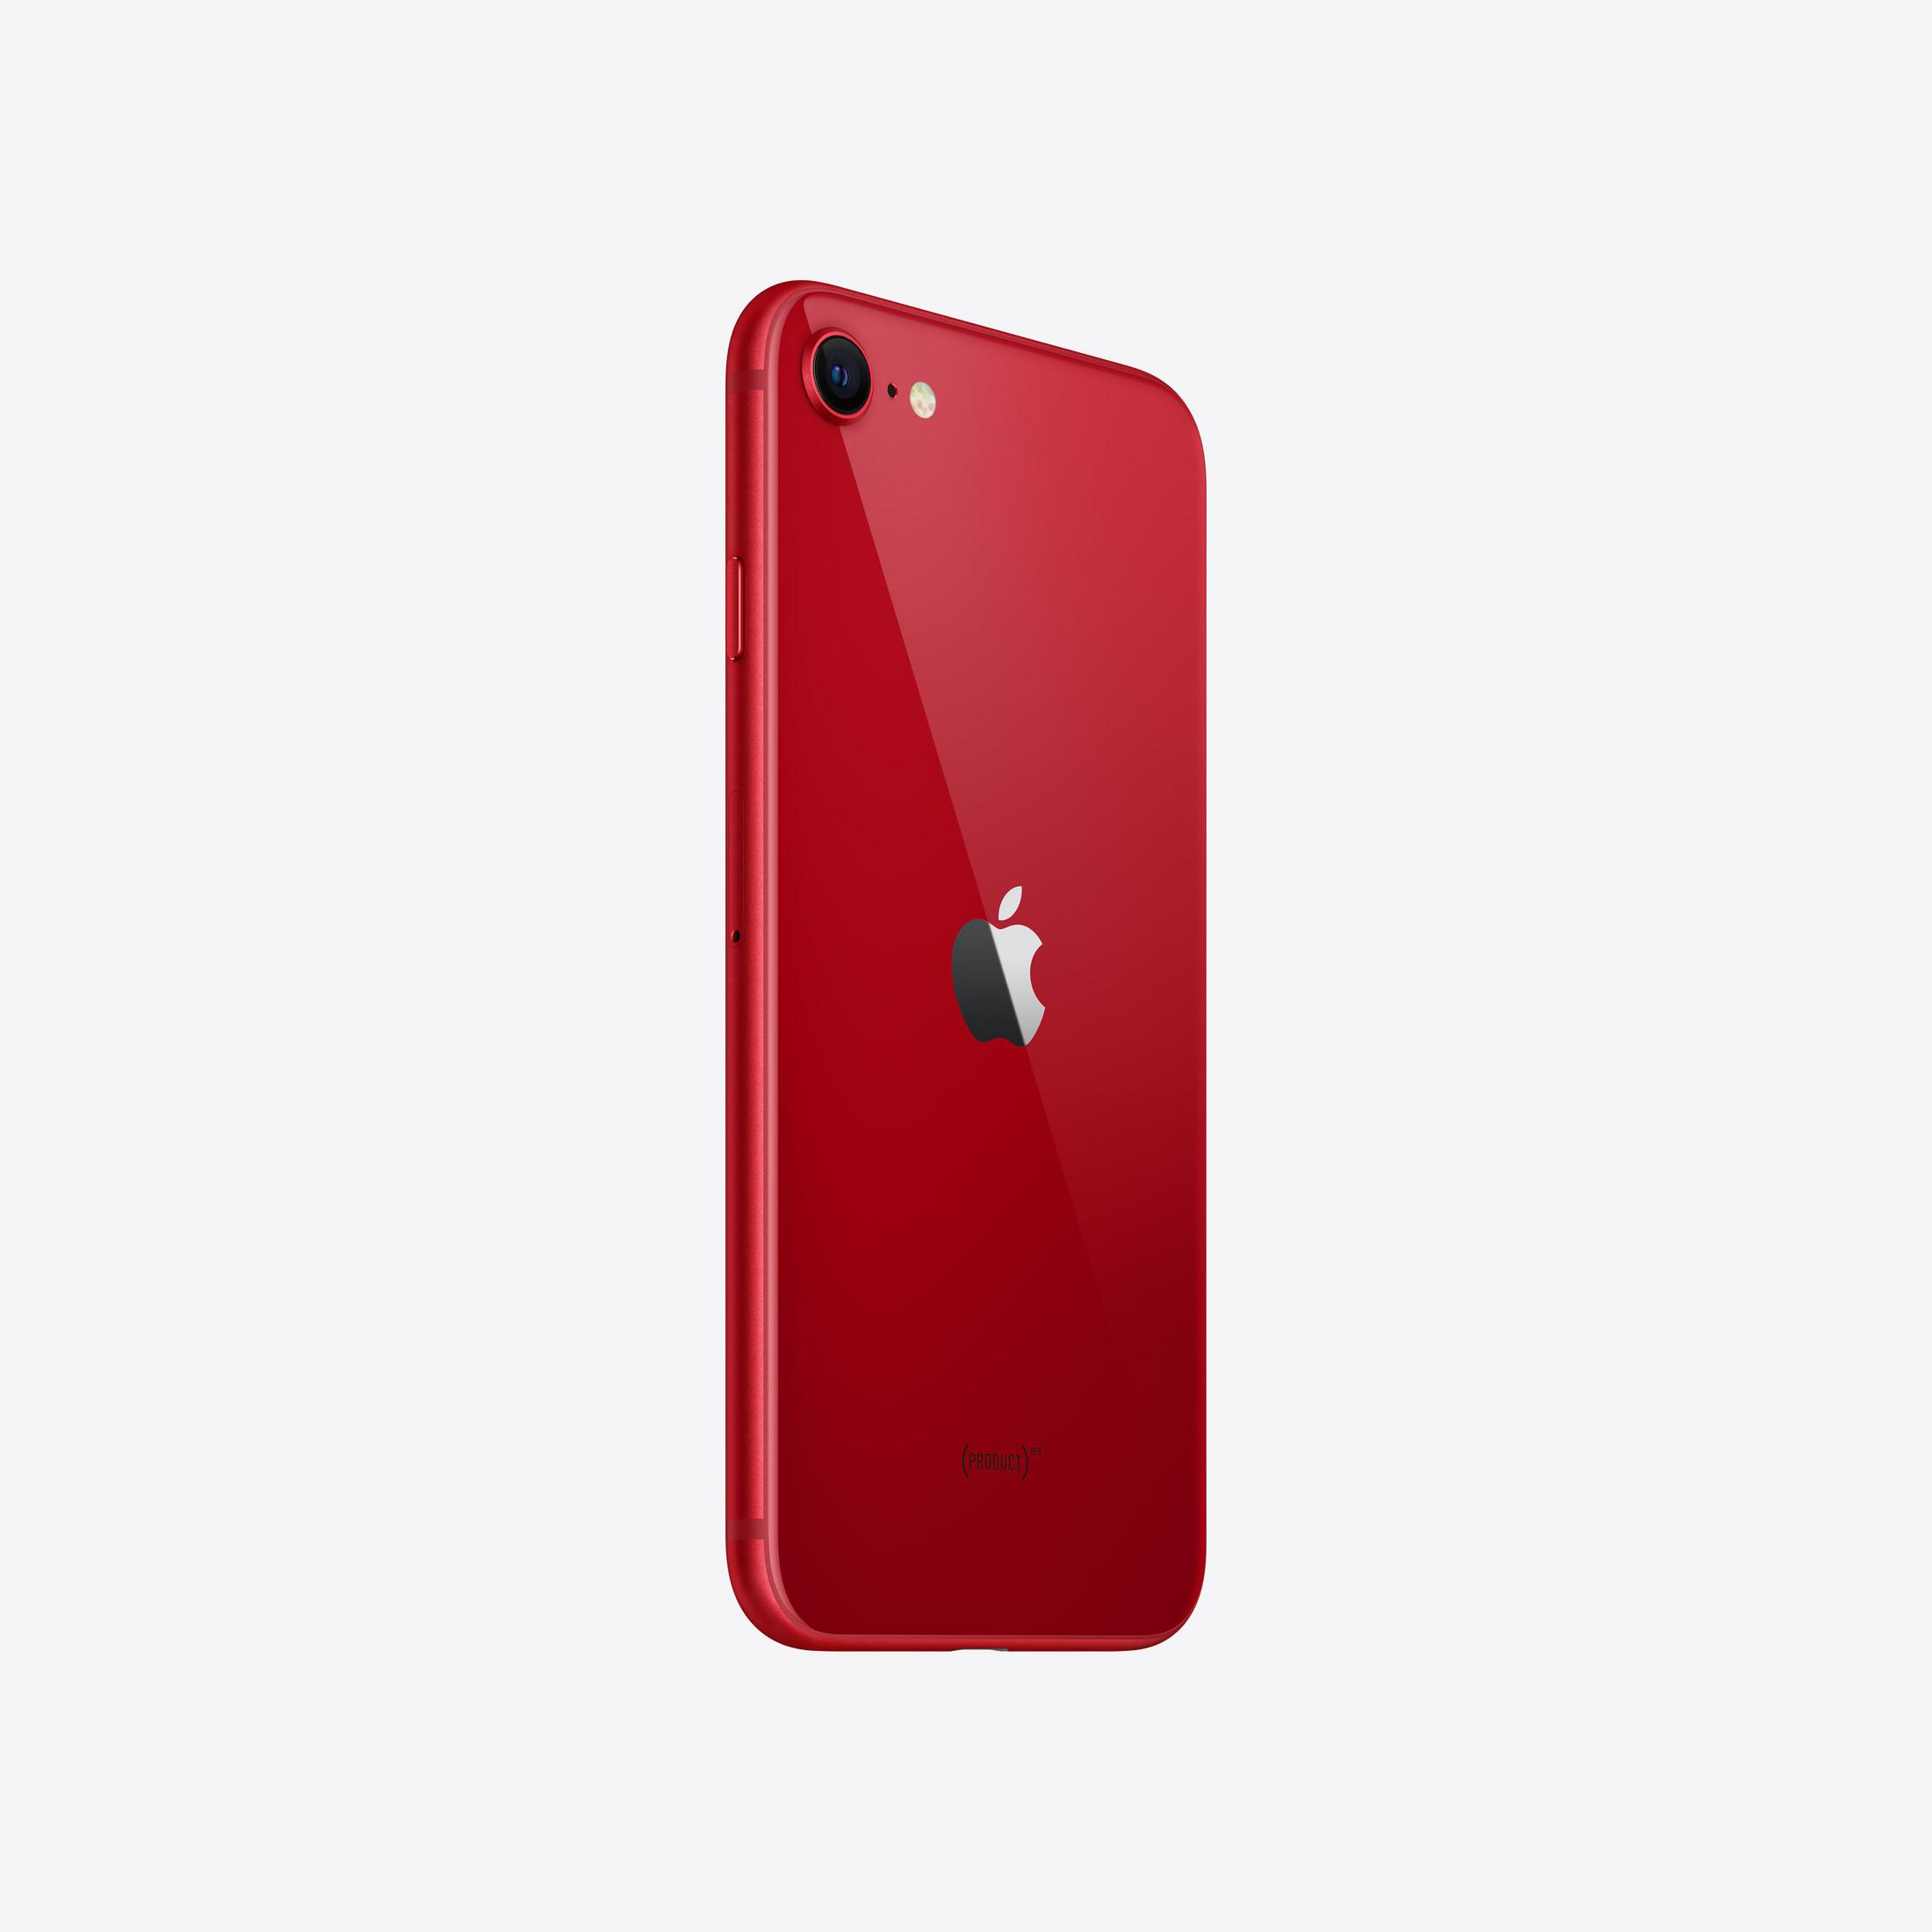 APPLE IPHONE SE 256GB (PRODUCT) RED 256 GB Red (Product)